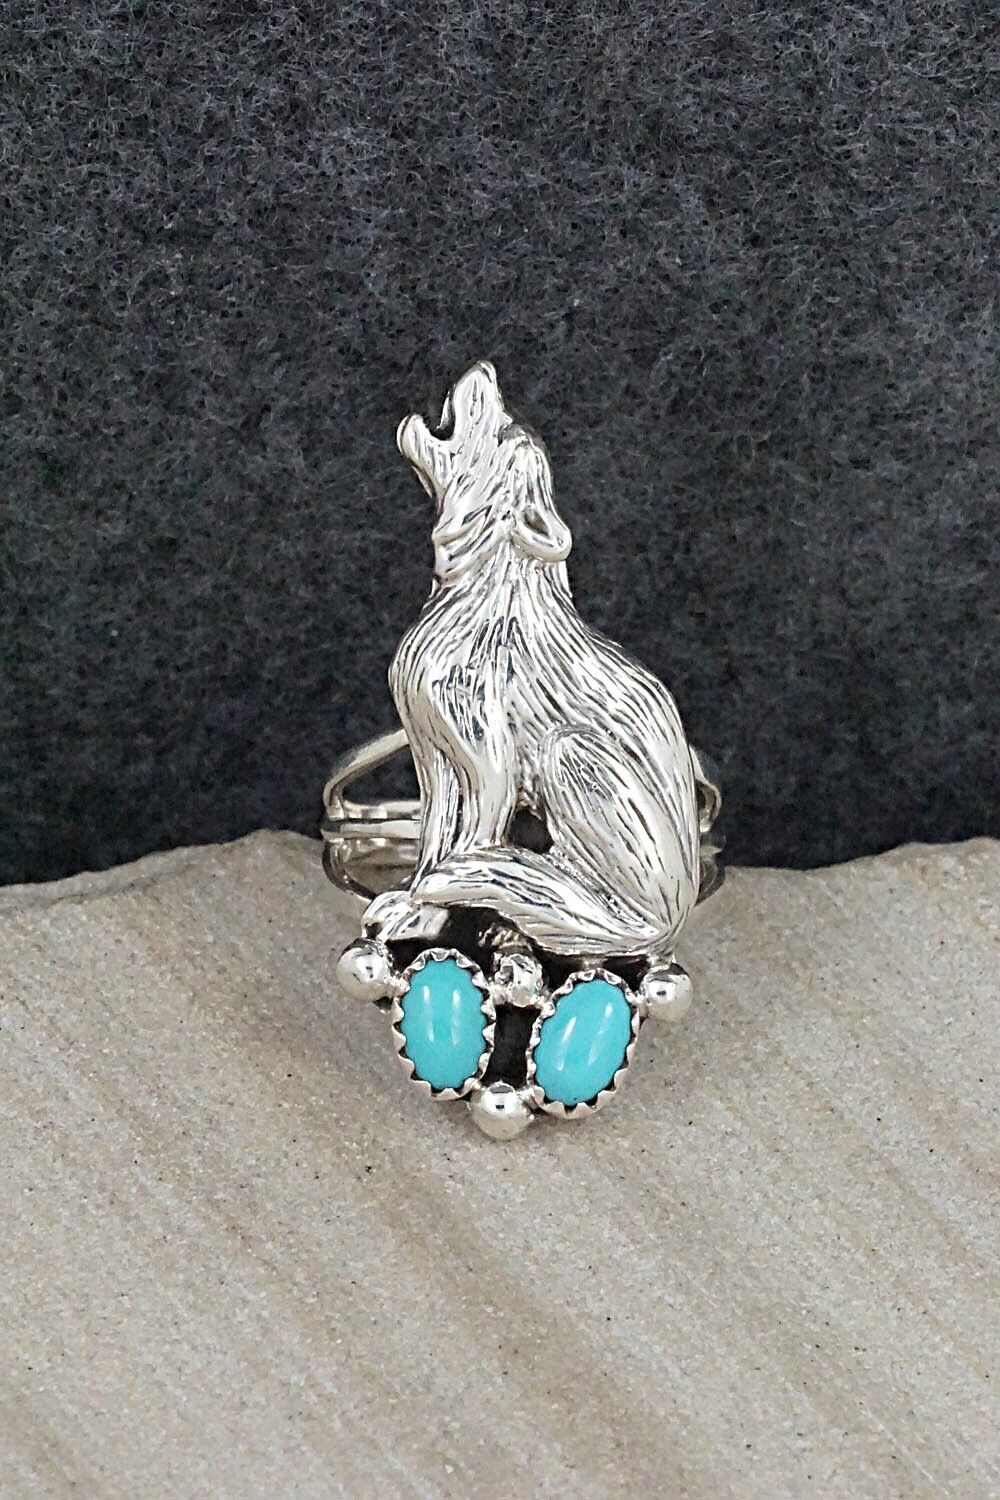 Turquoise & Sterling Silver Ring - Samuel Yellowhair - Size 5.25